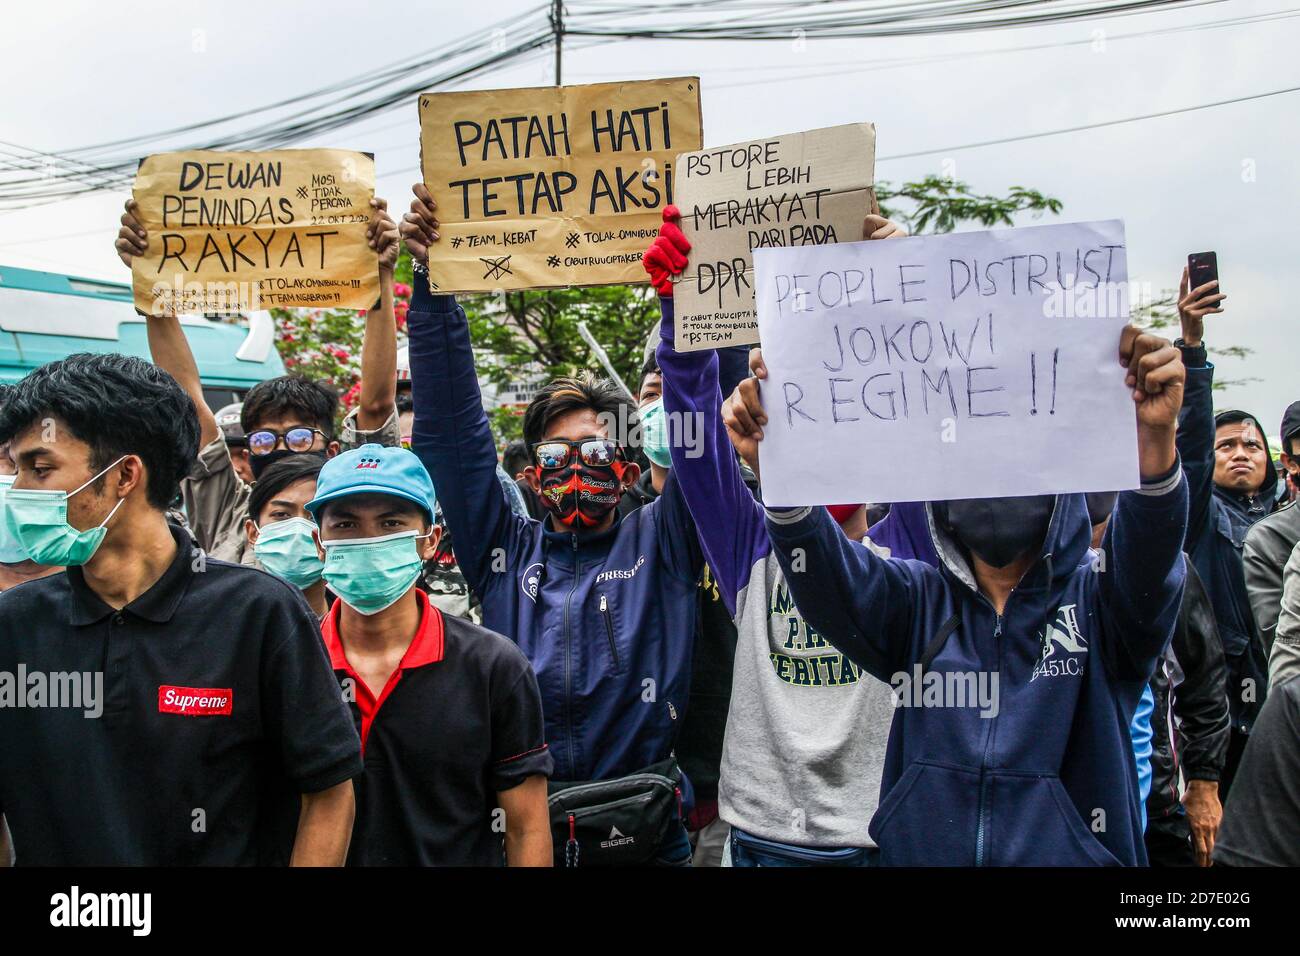 Protesters wearing facemask display   protest placards outside the factory during protest in Rancaekek. Thousands protest against a controversial law 'omnibus' that was passed by Parliament. The new law aims to create jobs and raise investment by reducing regulatory requirements for business permits and land acquisition processes. Many fear, the new law will harm labour rights and indigenous land rights. Stock Photo